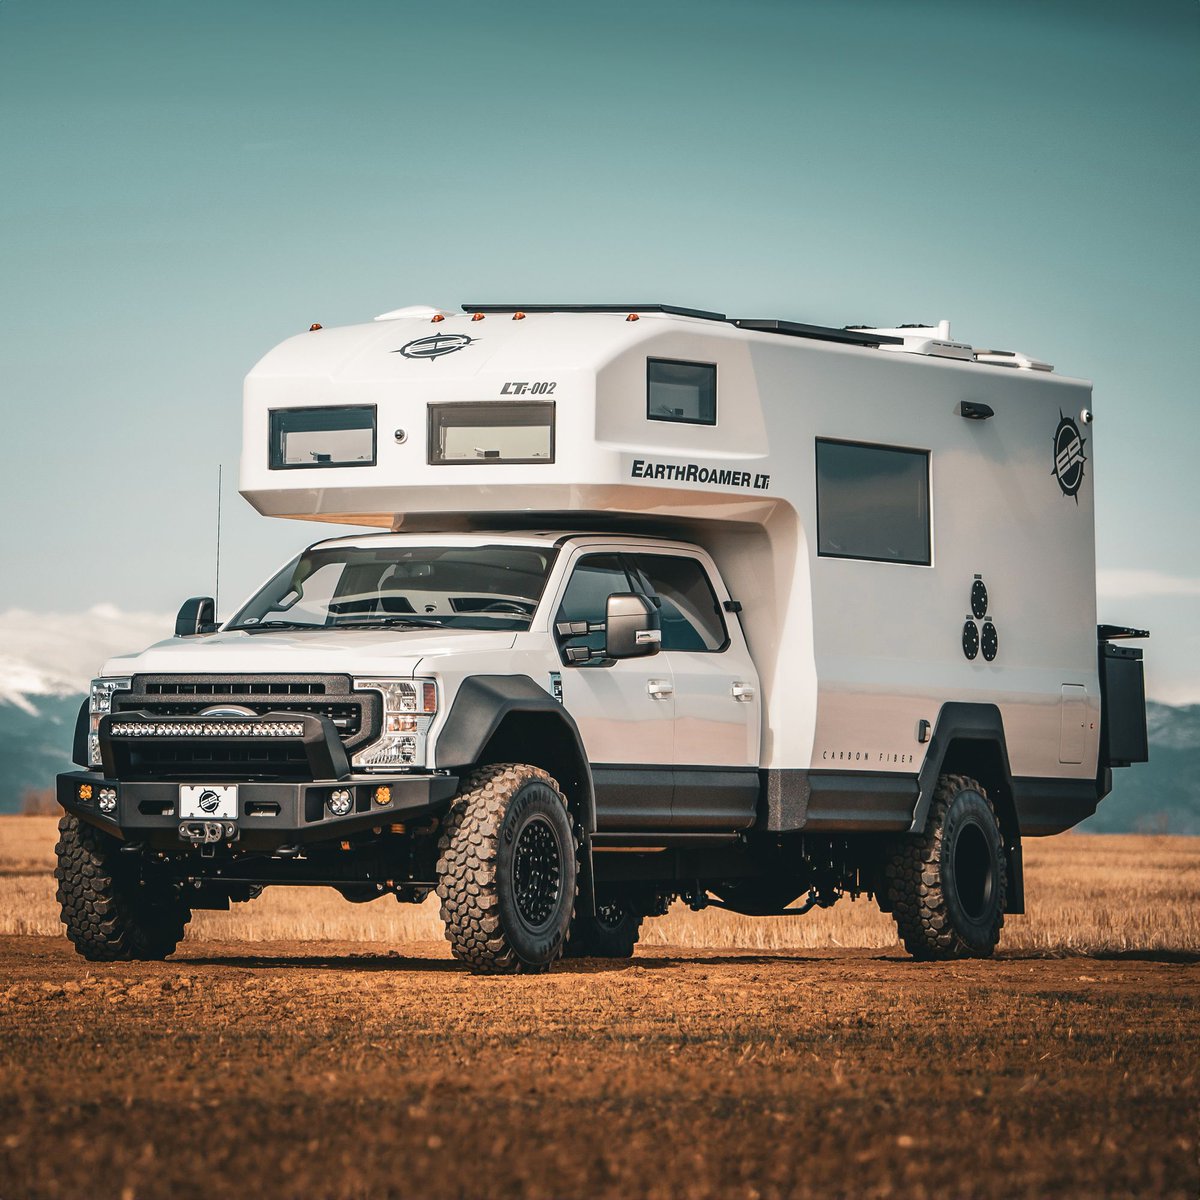 Life is meant for epic adventures. EarthRoamer ensures you experience the journey of a lifetime. · · · #earthroamer #offroad4x4 #expeditionvehicle #campinglife #overlanding #4x4life #4x4trucks #vanlife #vanlifeadventures